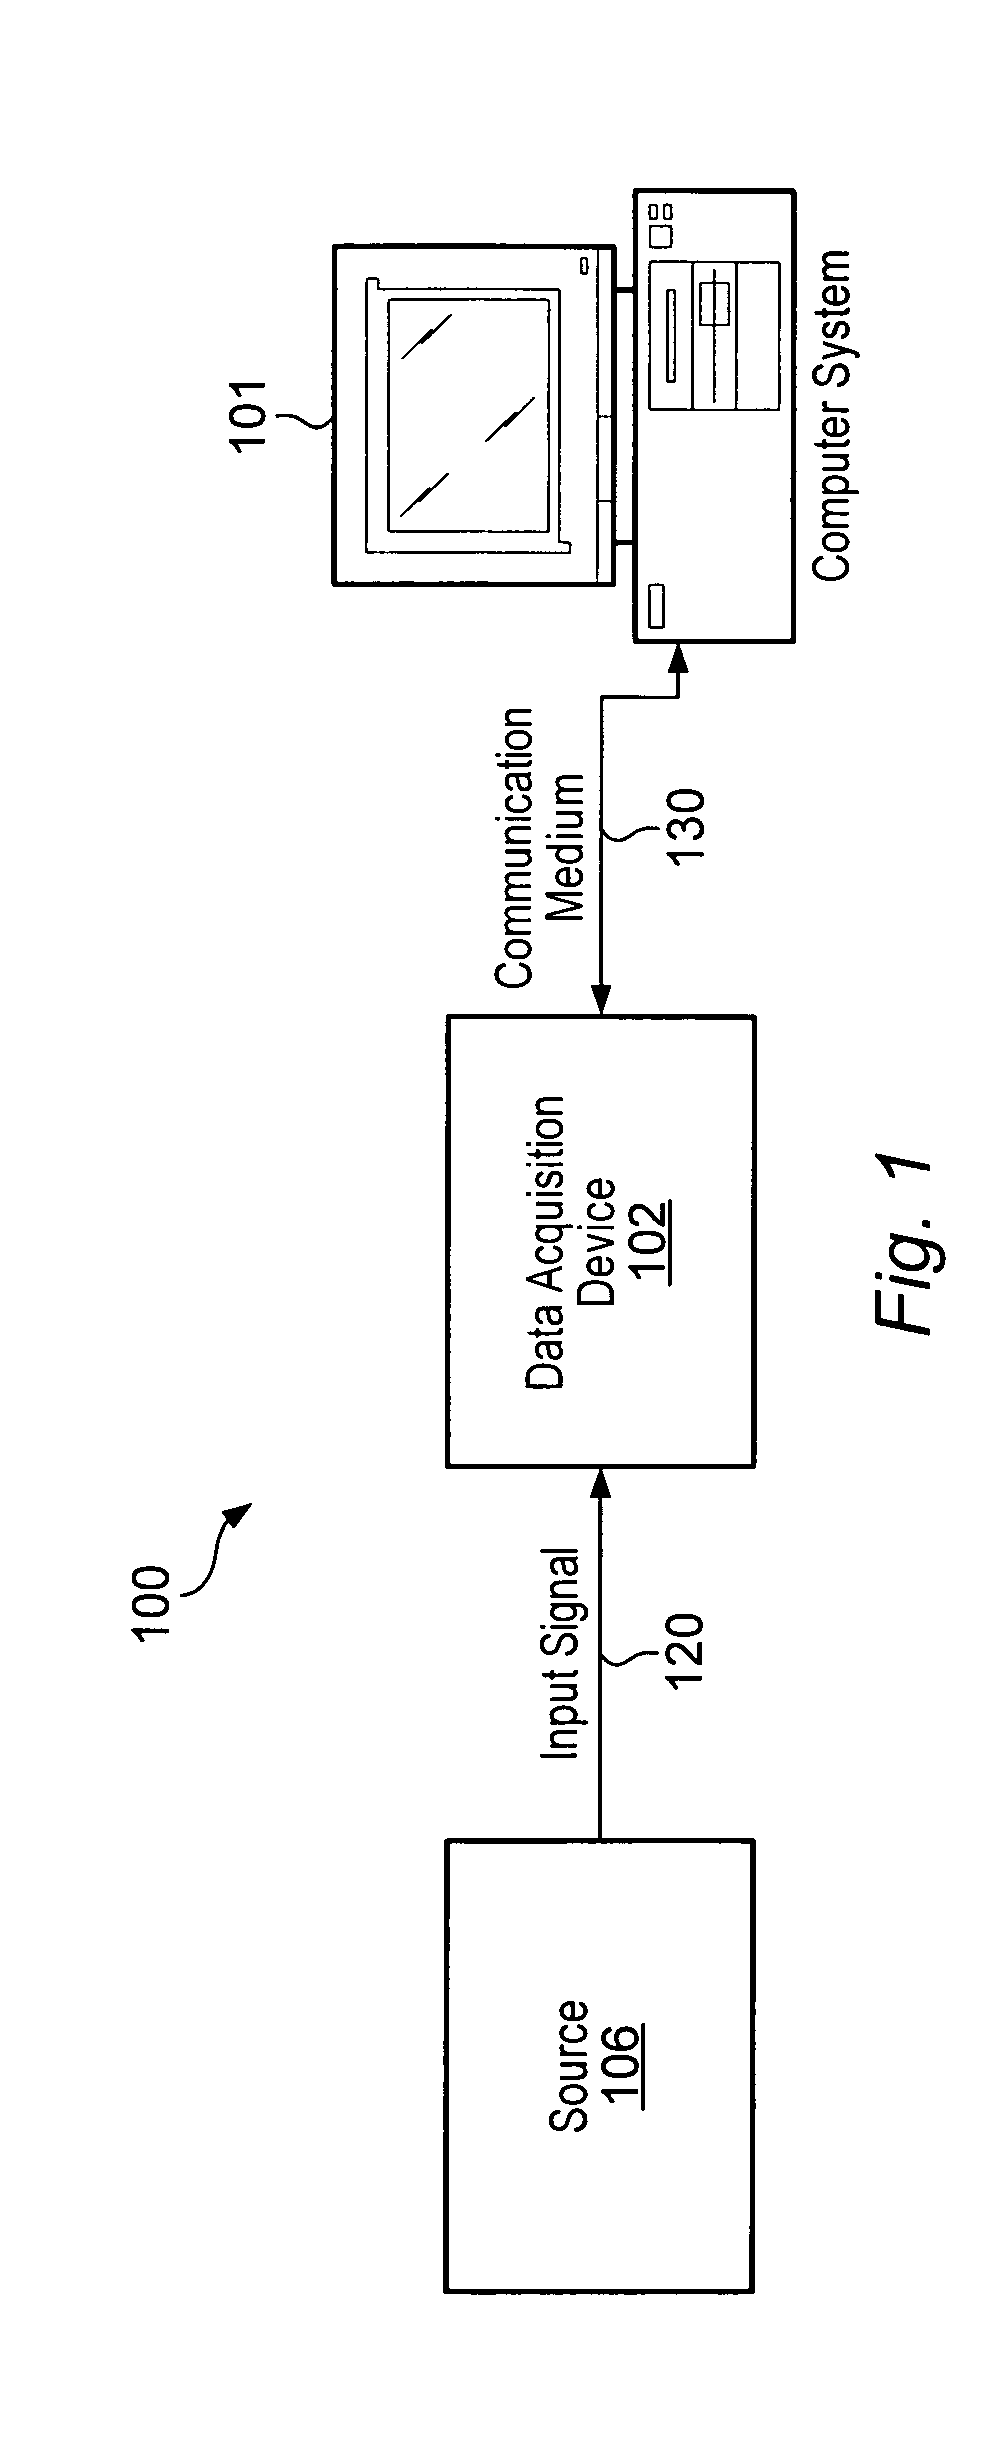 Differential structure programmable gain instrumentation amplifier